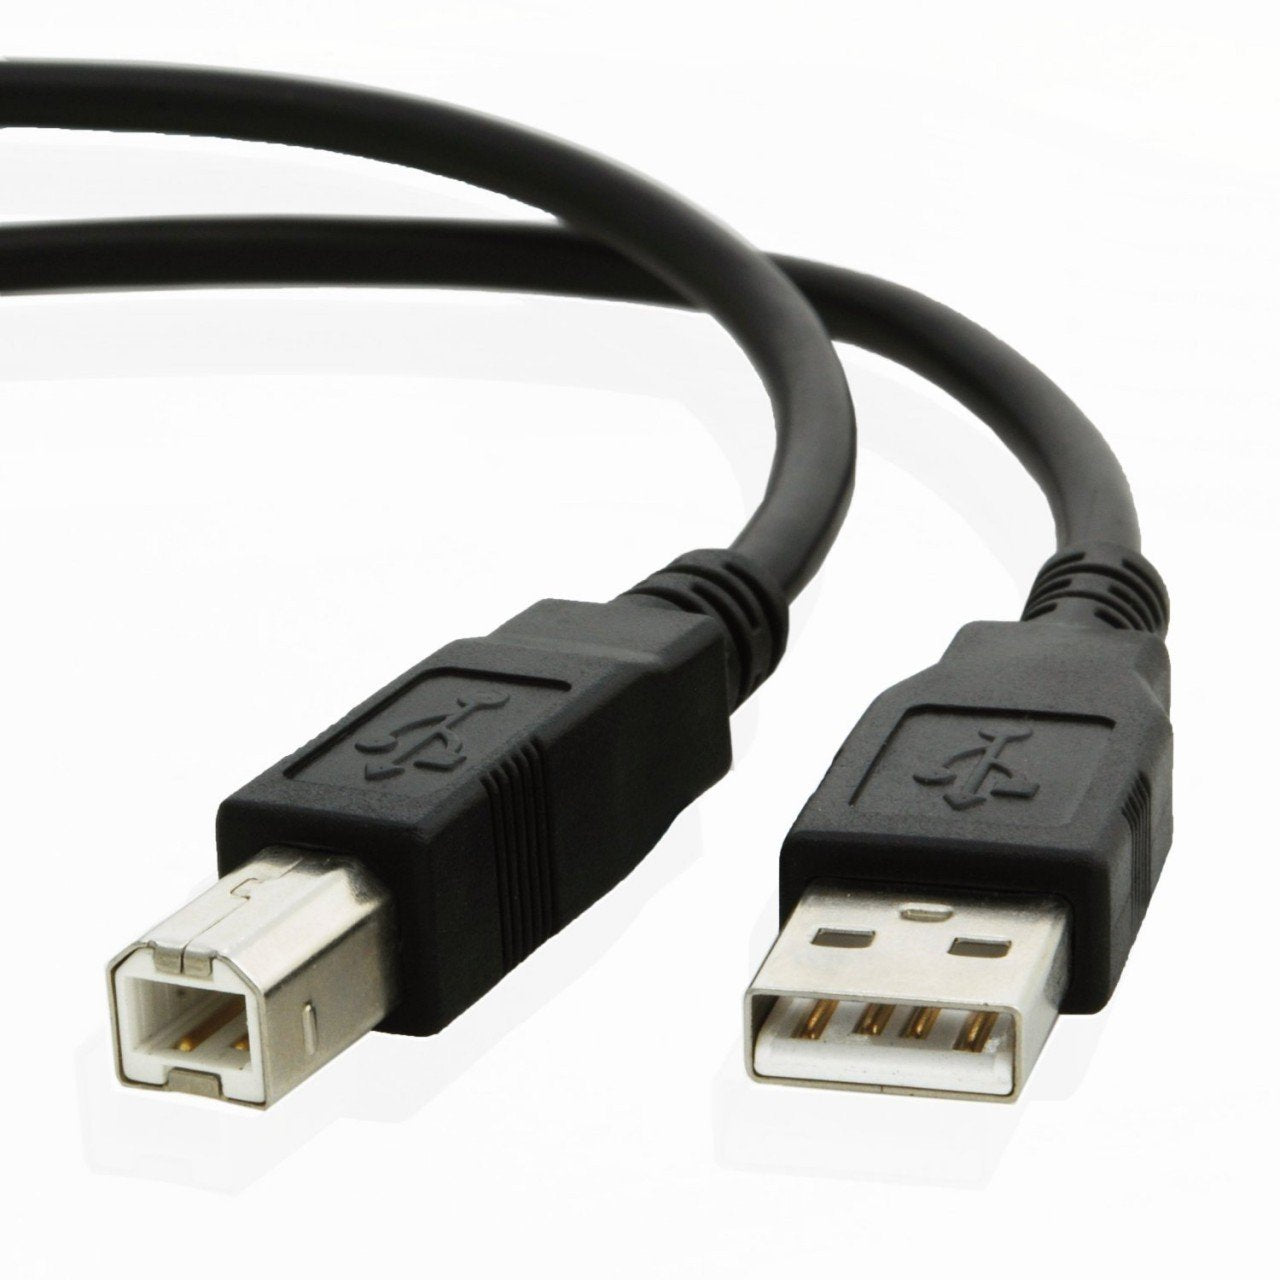 USB cable for Epson WORKFORCE PRO WF-4740